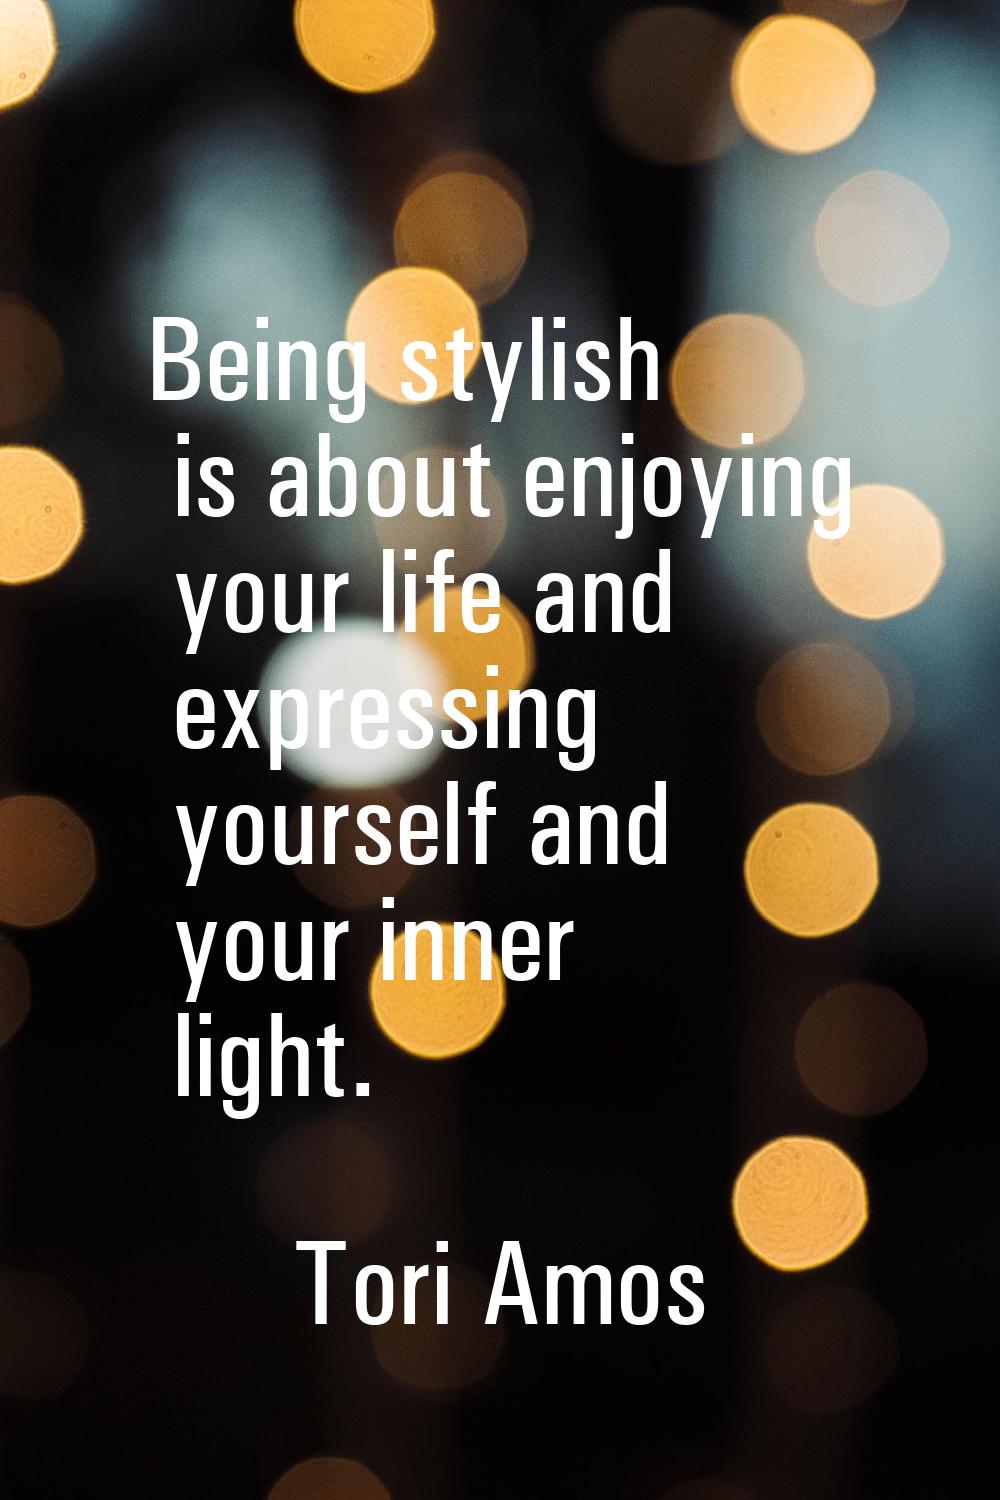 Being stylish is about enjoying your life and expressing yourself and your inner light.